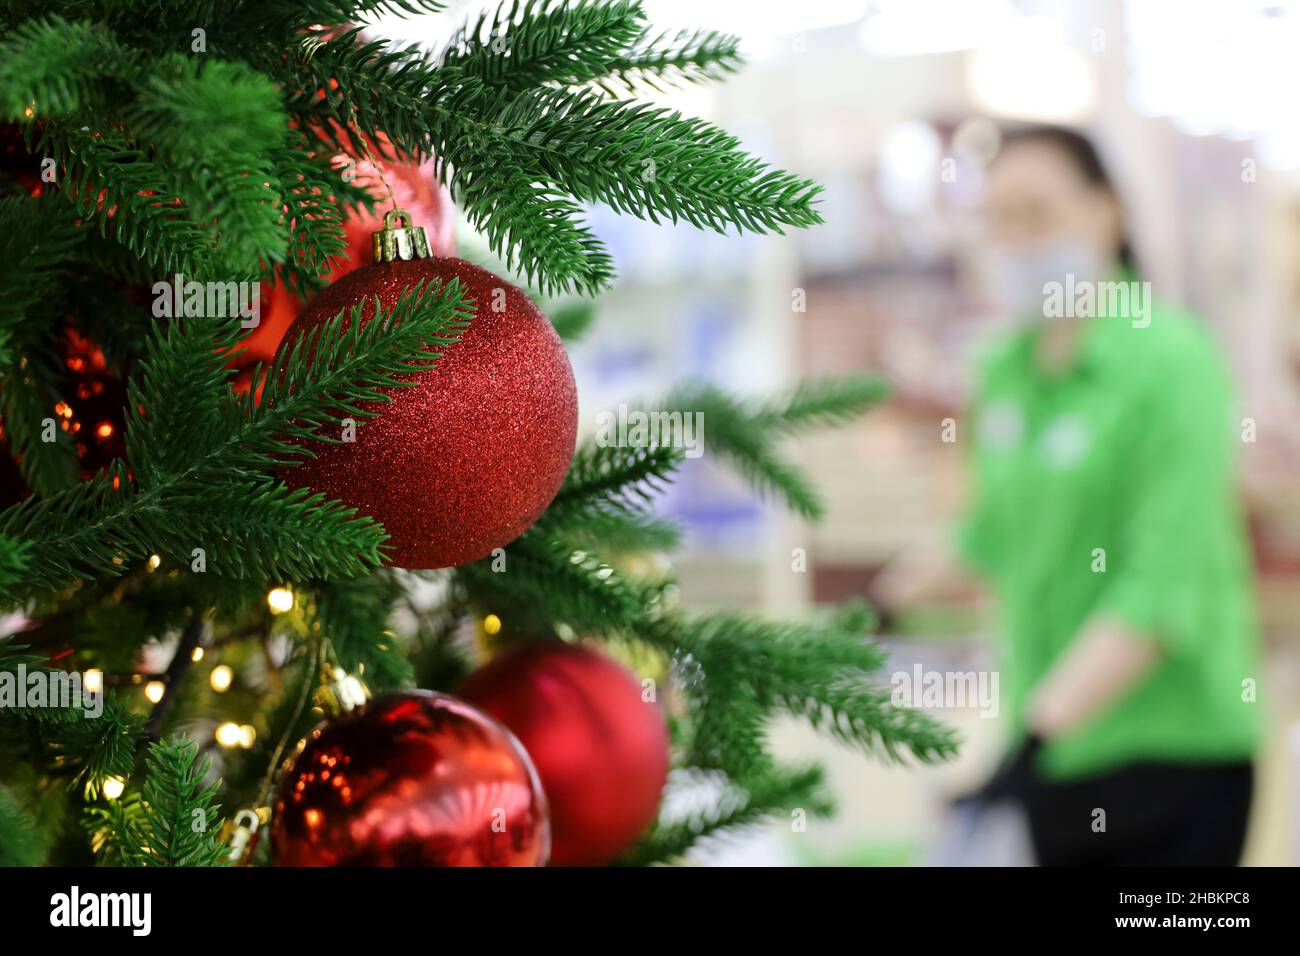 Christmas sale, New Year tree with red toy balls in a shopping mall on woman in mask background. Winter holidays, safety shopping during coronavirus Stock Photo